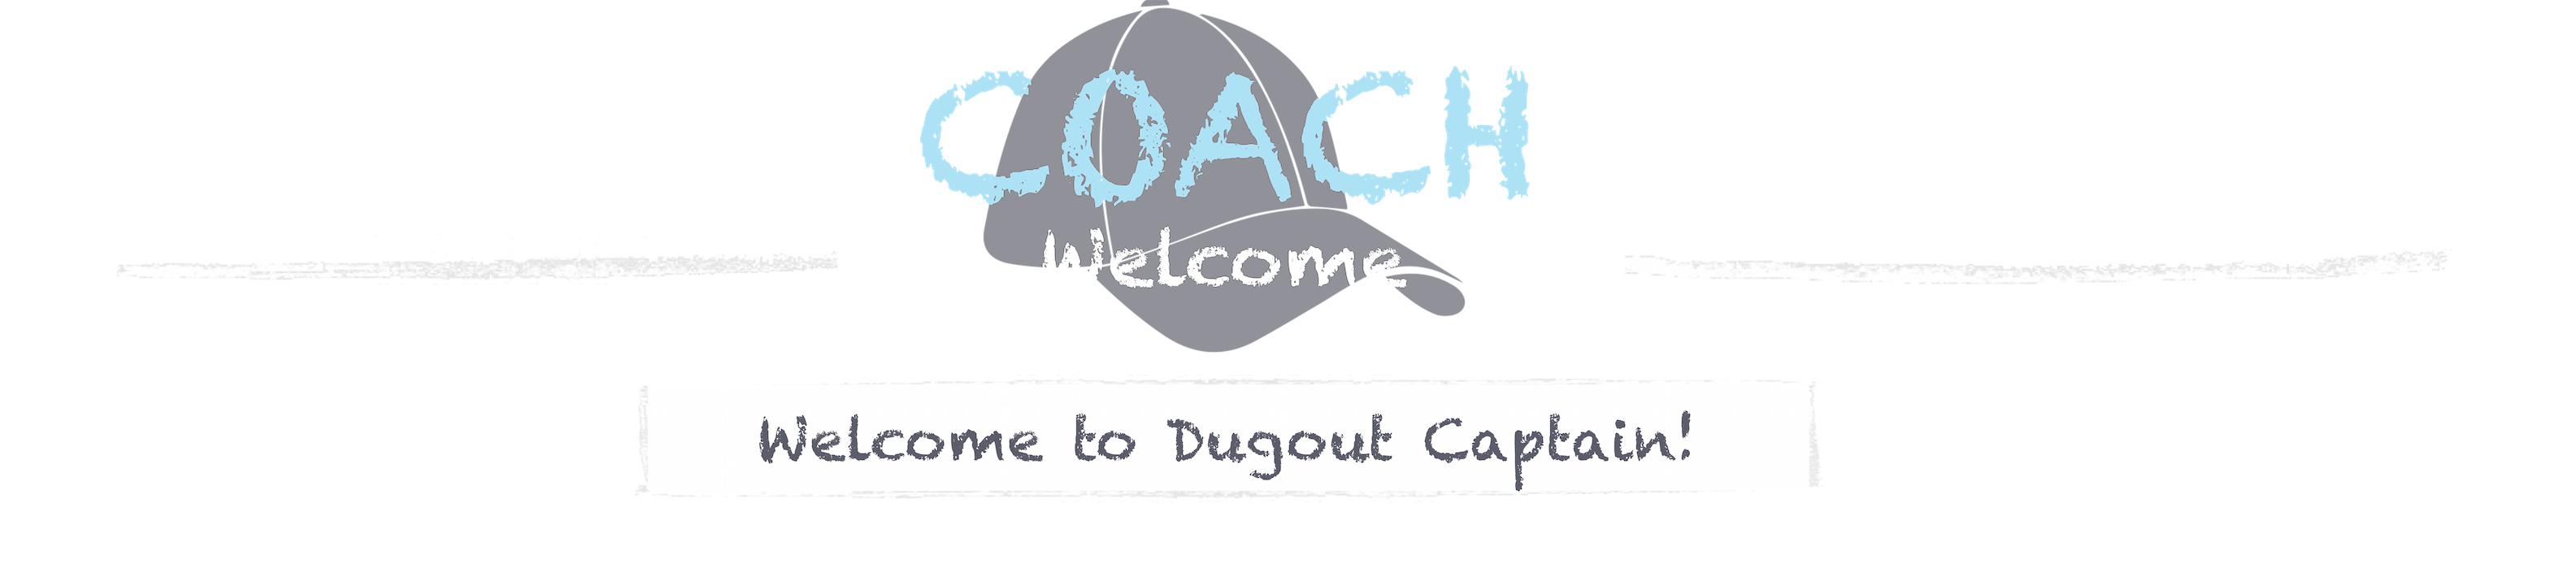 about-page-headers_welcome-coach